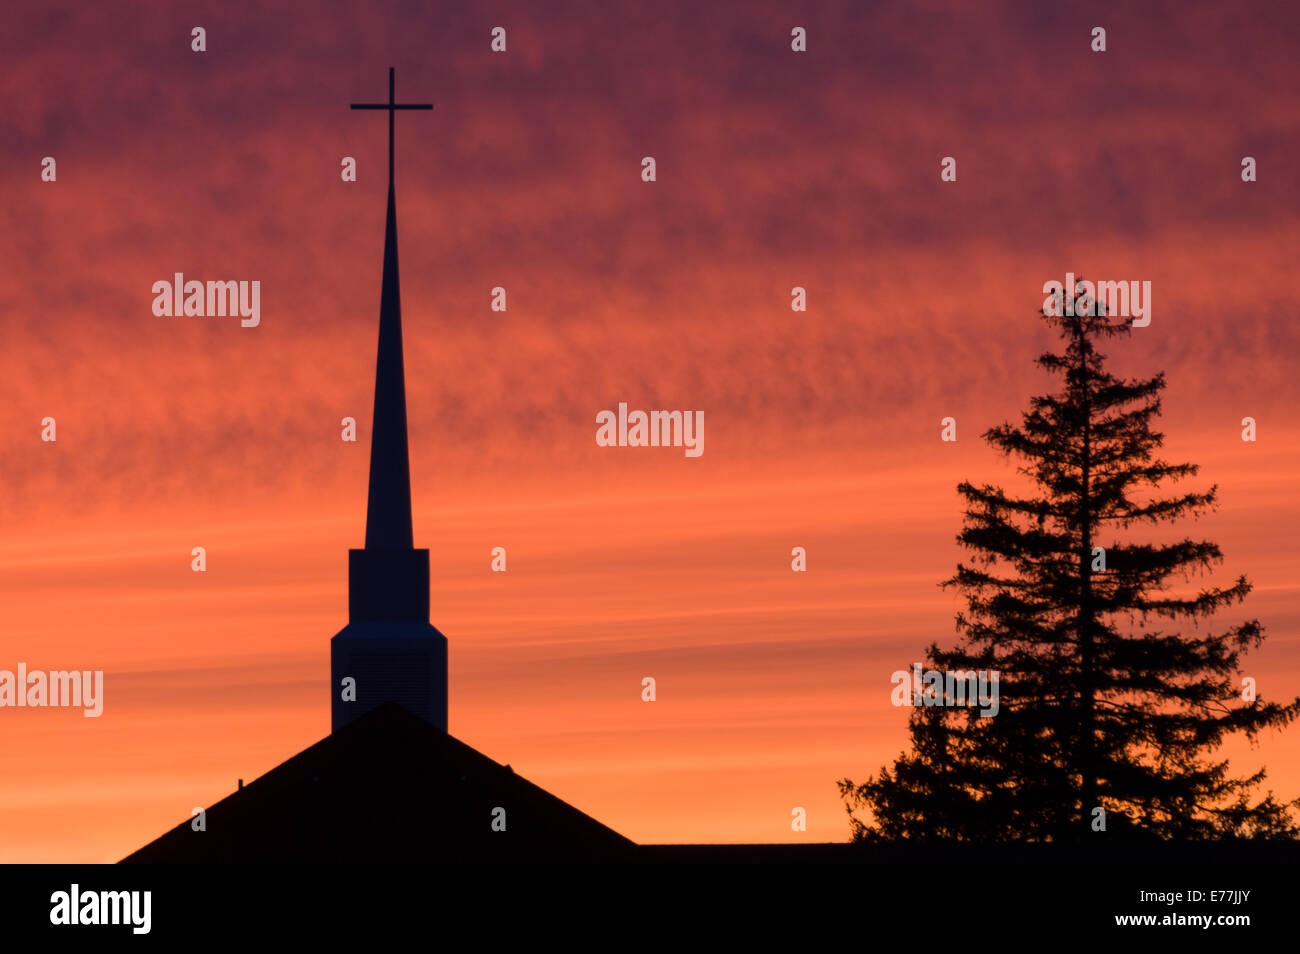 A church steeple and pine tree are silhouetted by evening sunset. Stock Photo